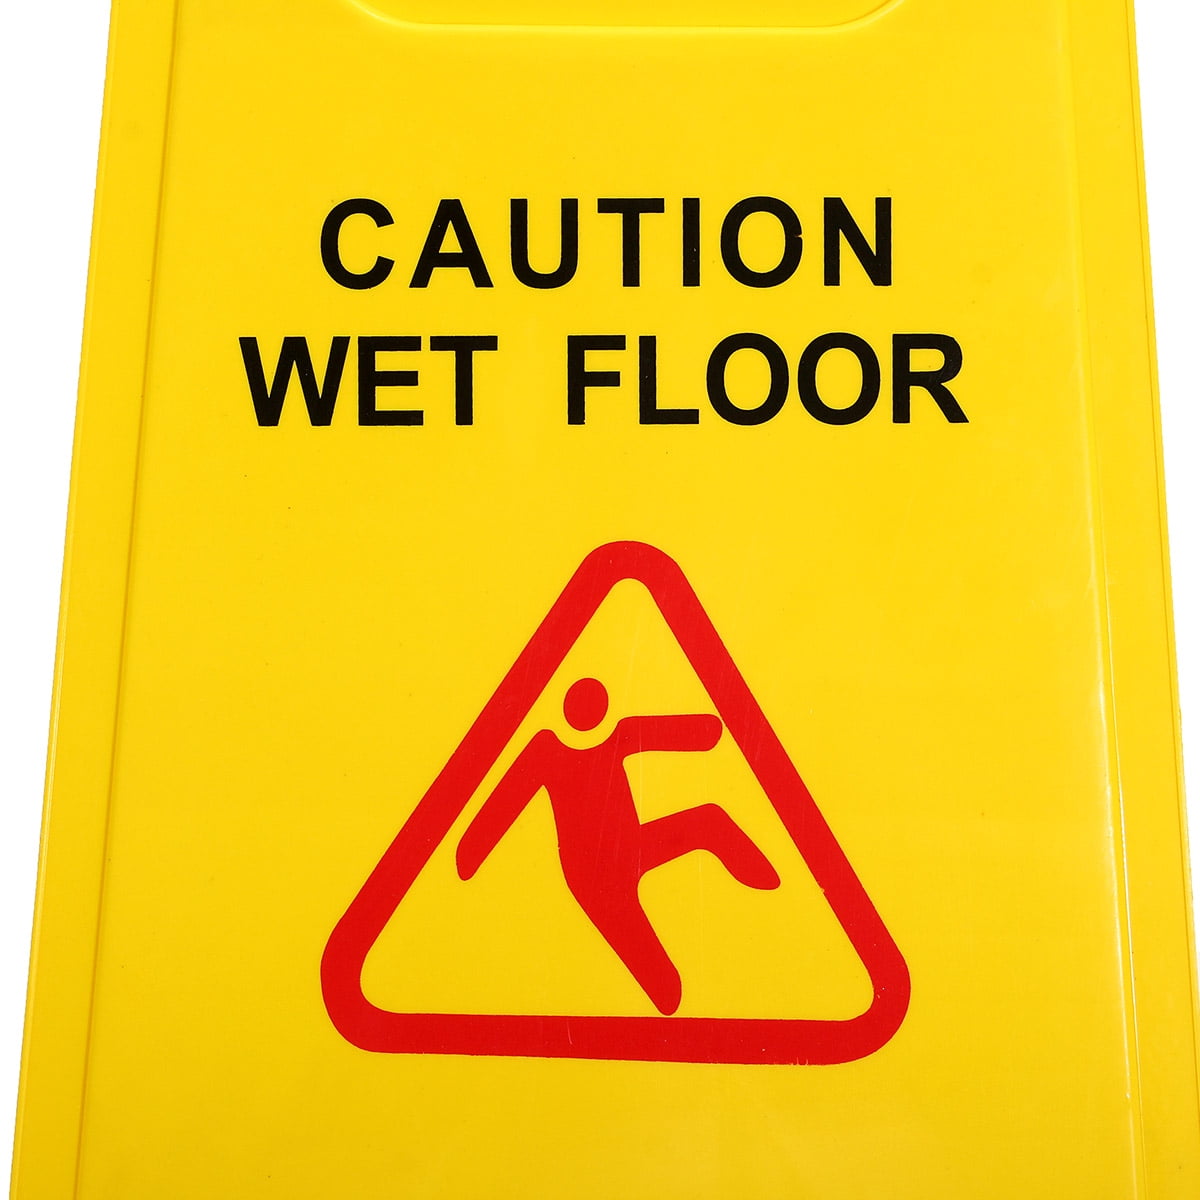 Caution Wet Floor Yellow Safety Sign Cleaning Slippery Warning Bright 2 Sided